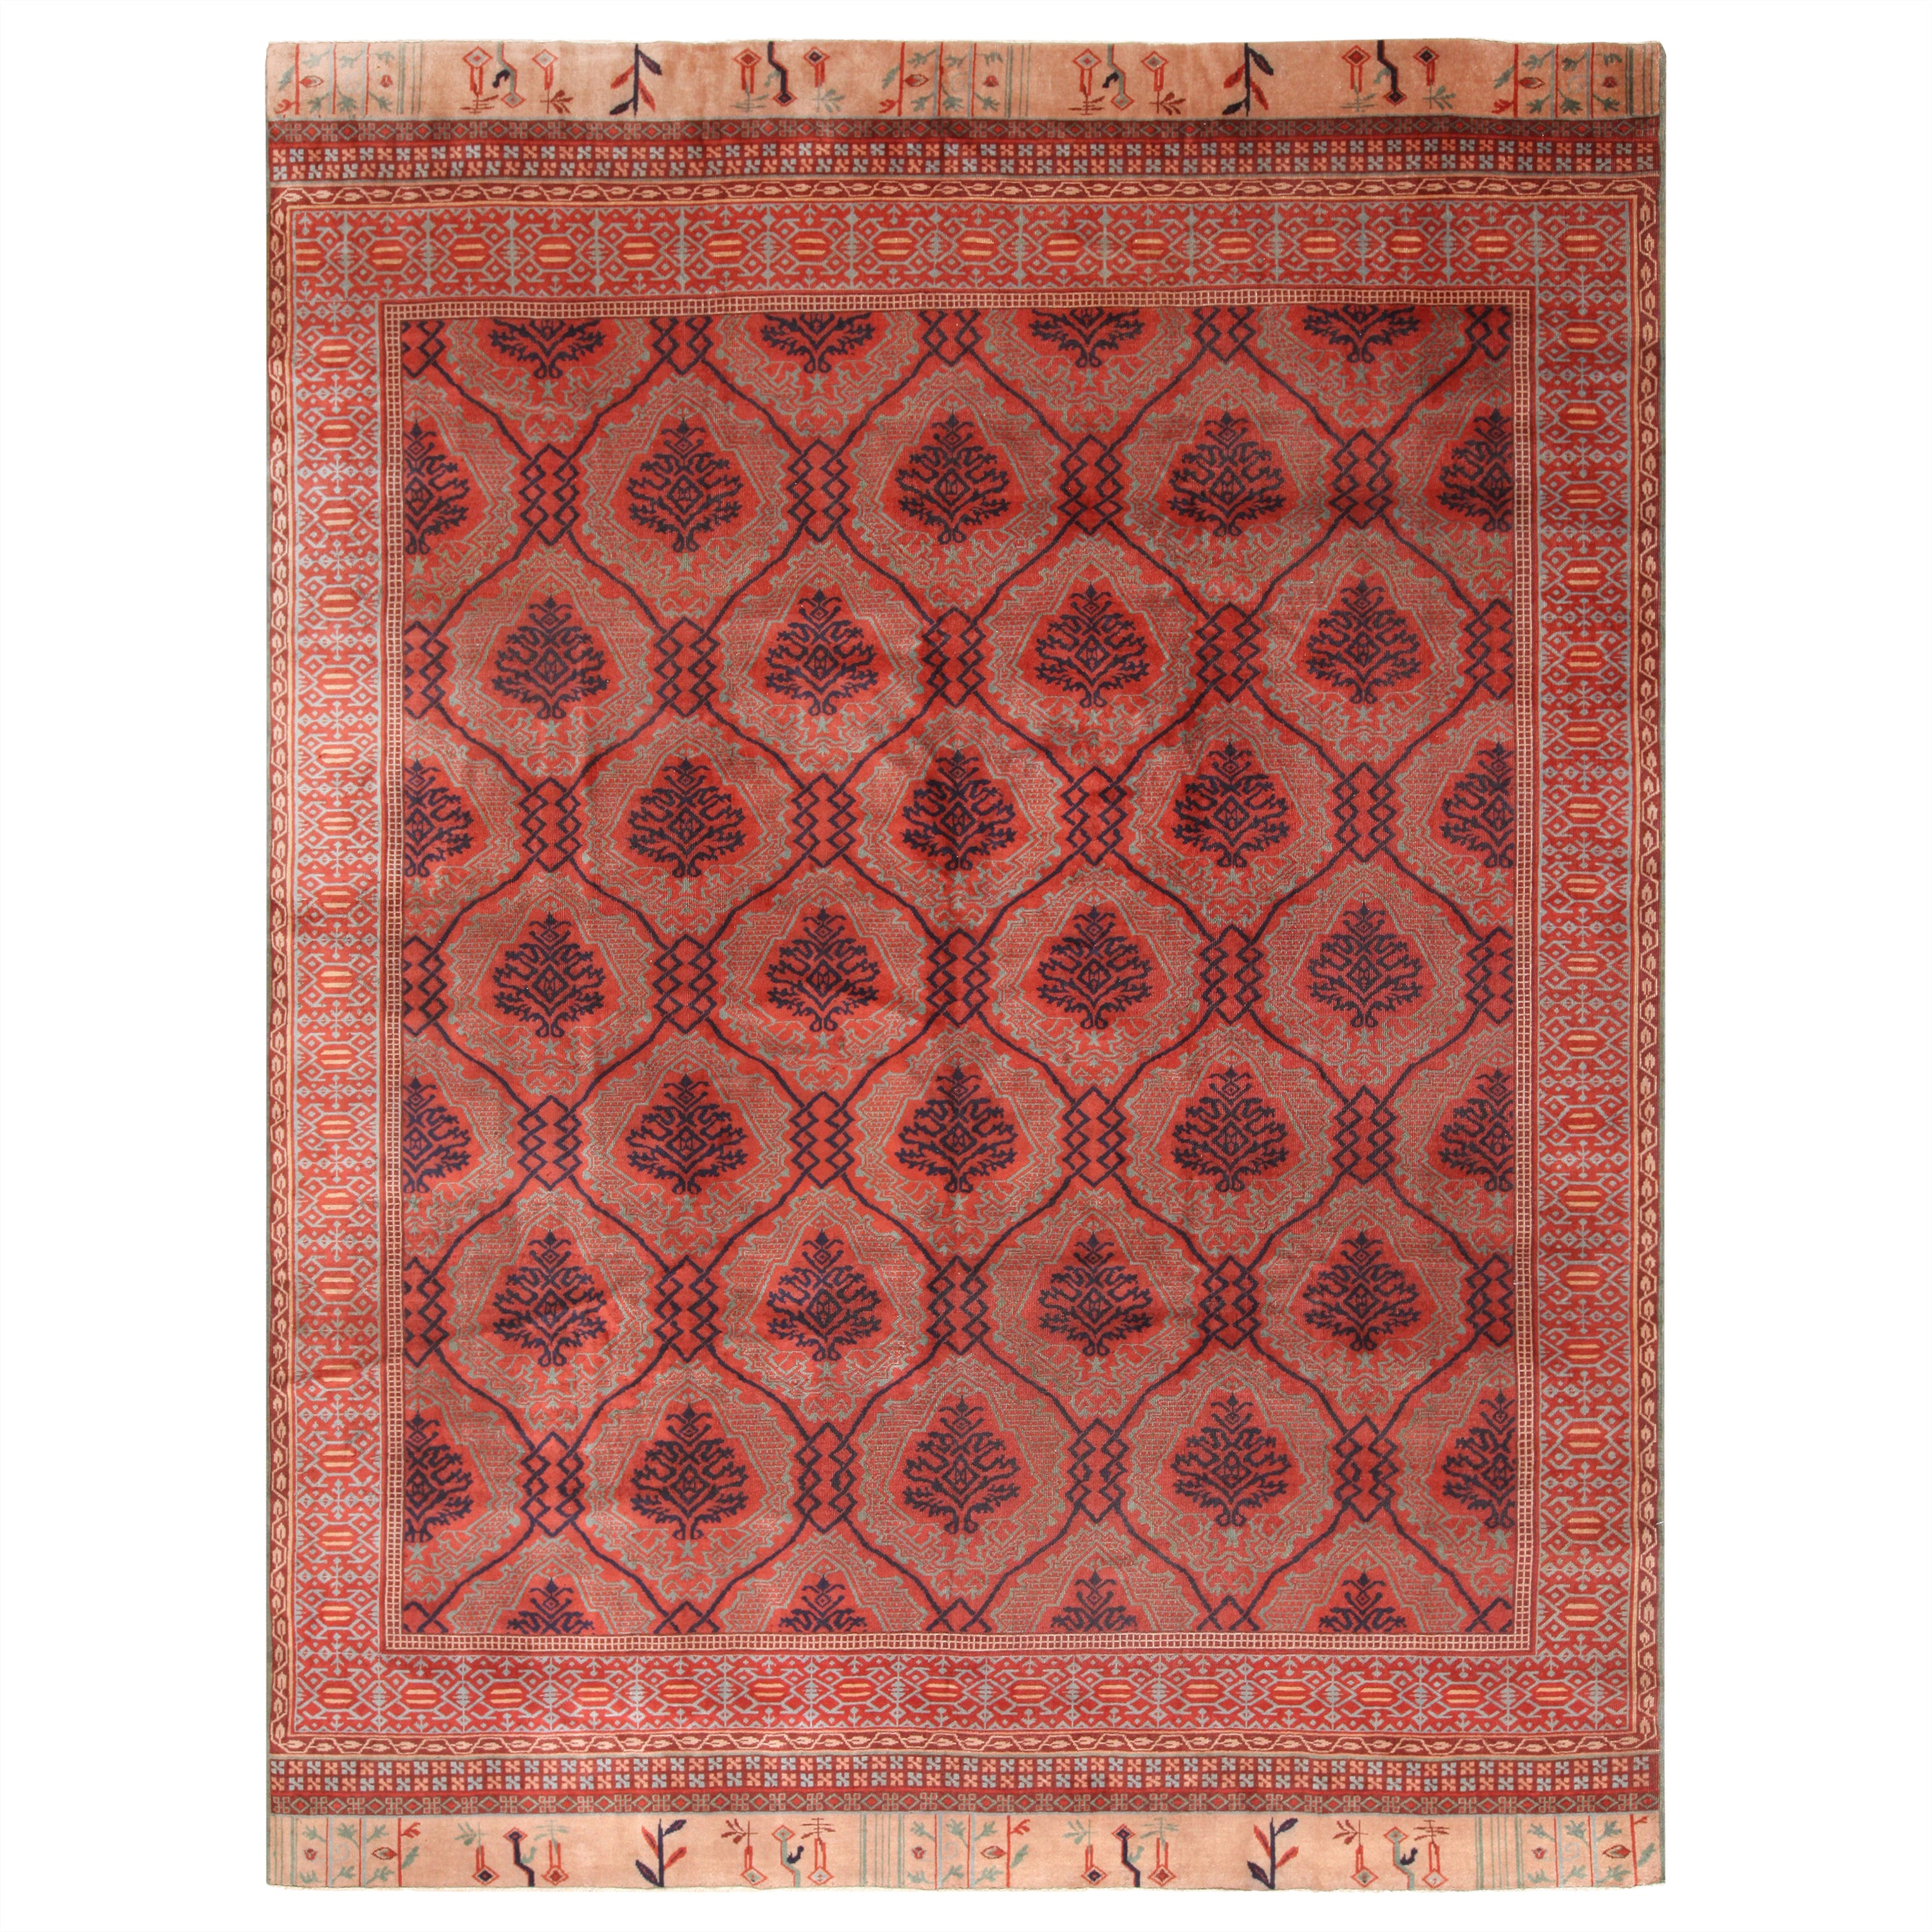 Red Antique Traditional Turkish Smnyrna Rug - 10'5" x 13'9"